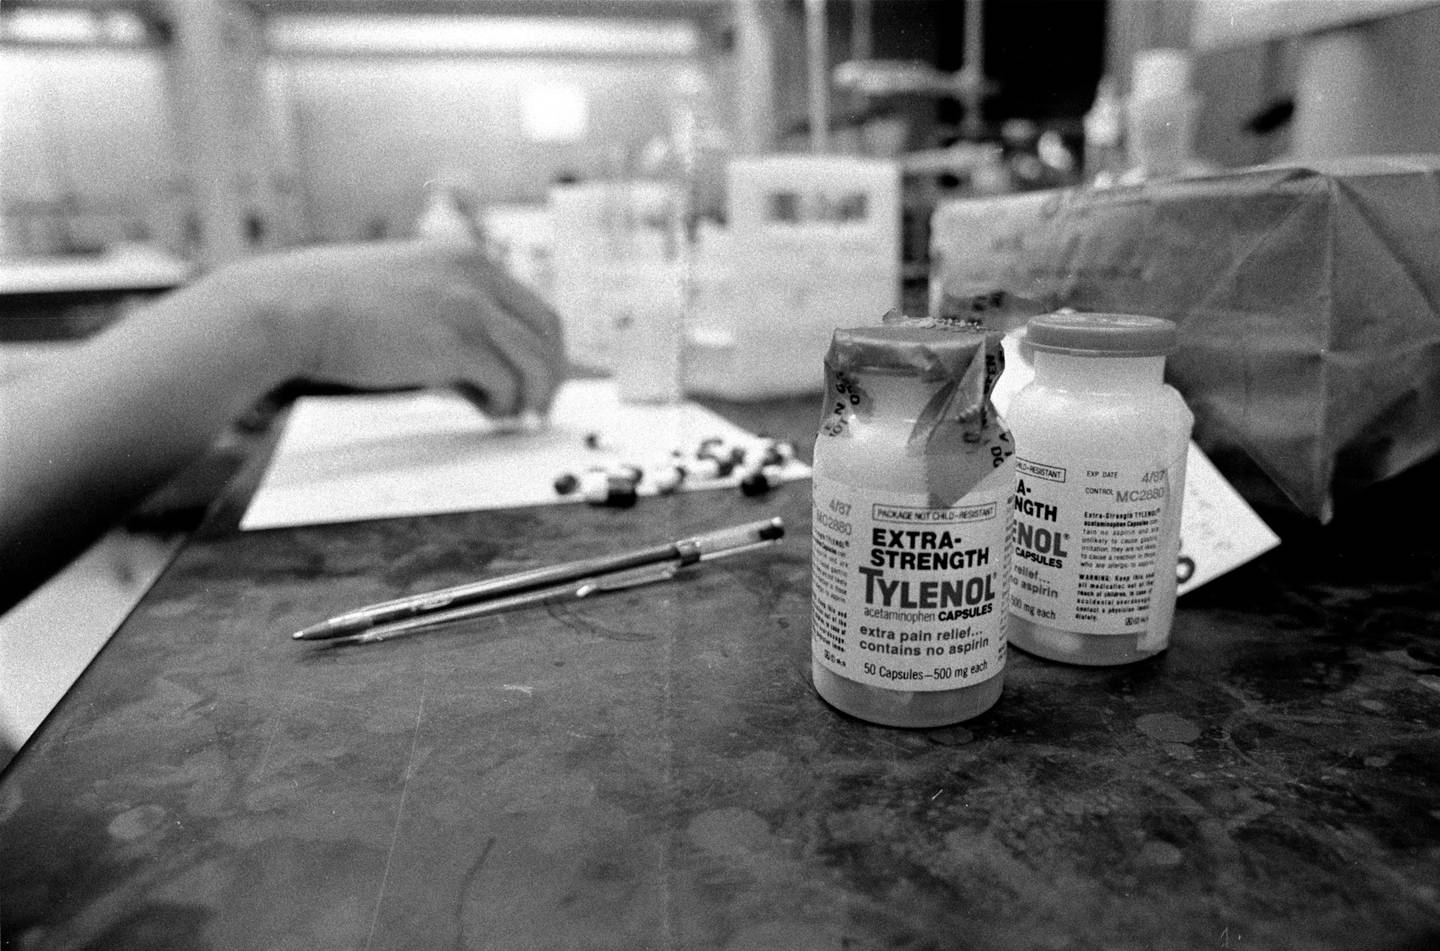 Chemists at the Illinois Public Health Department extract the contents of Extra-Strength Tylenol capsules for testing in 1982.